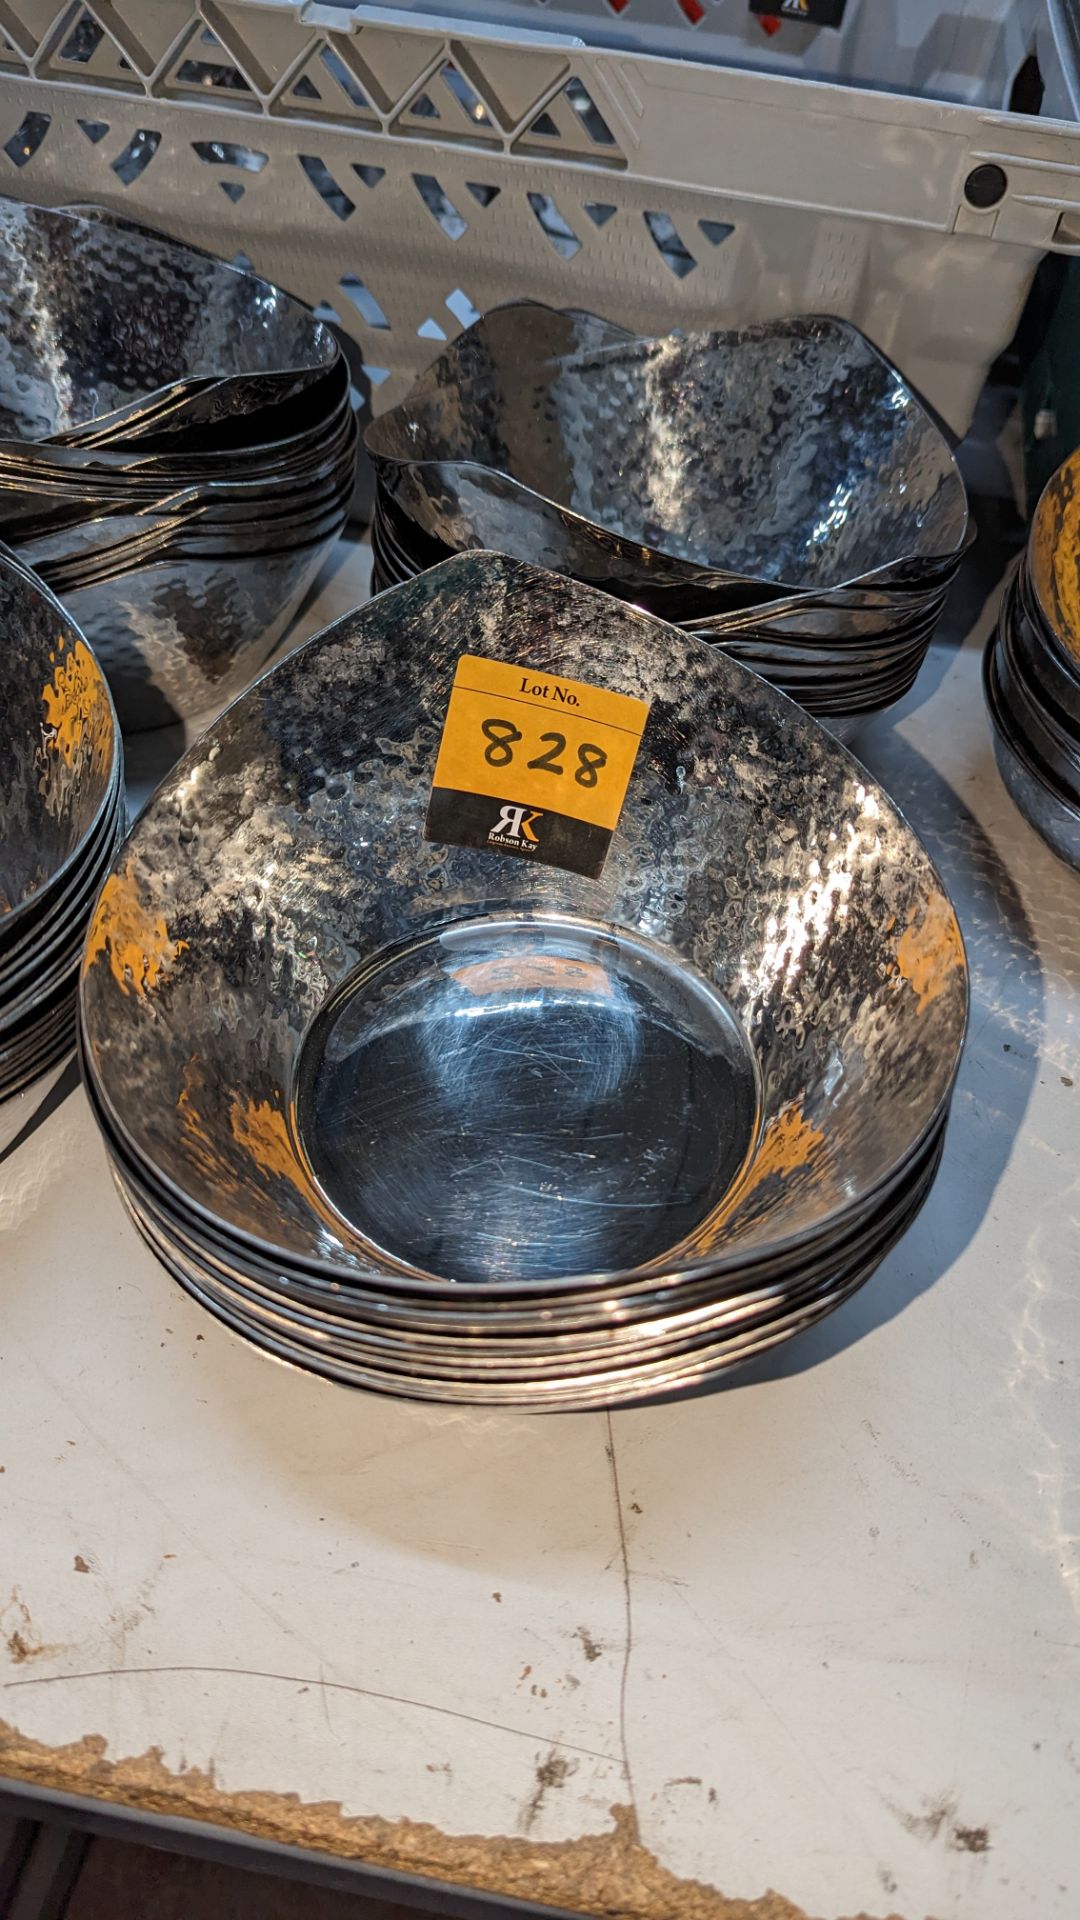 23 off 200mm x 185mm diameter hammered finish metal bowls - Image 2 of 3